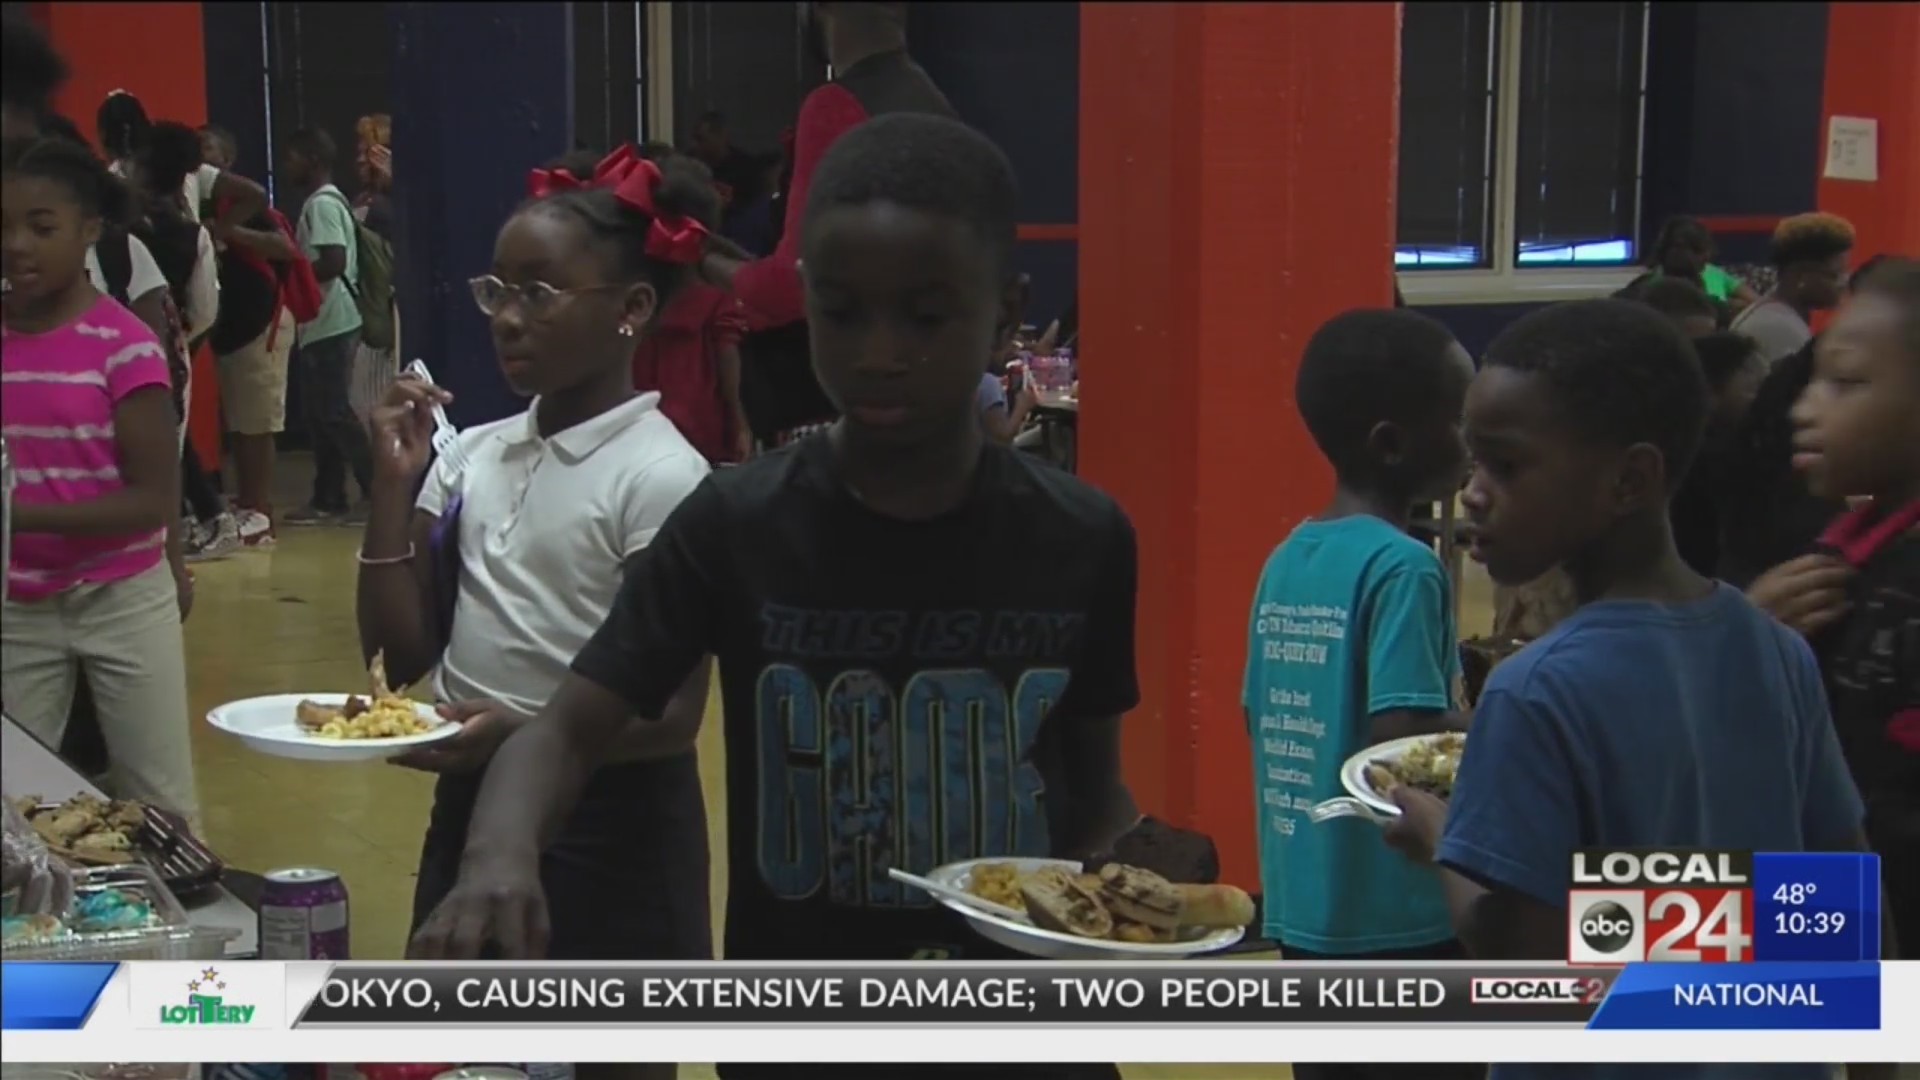 Humes Middle School hosts soup kitchens to tackle poverty in north Memphis